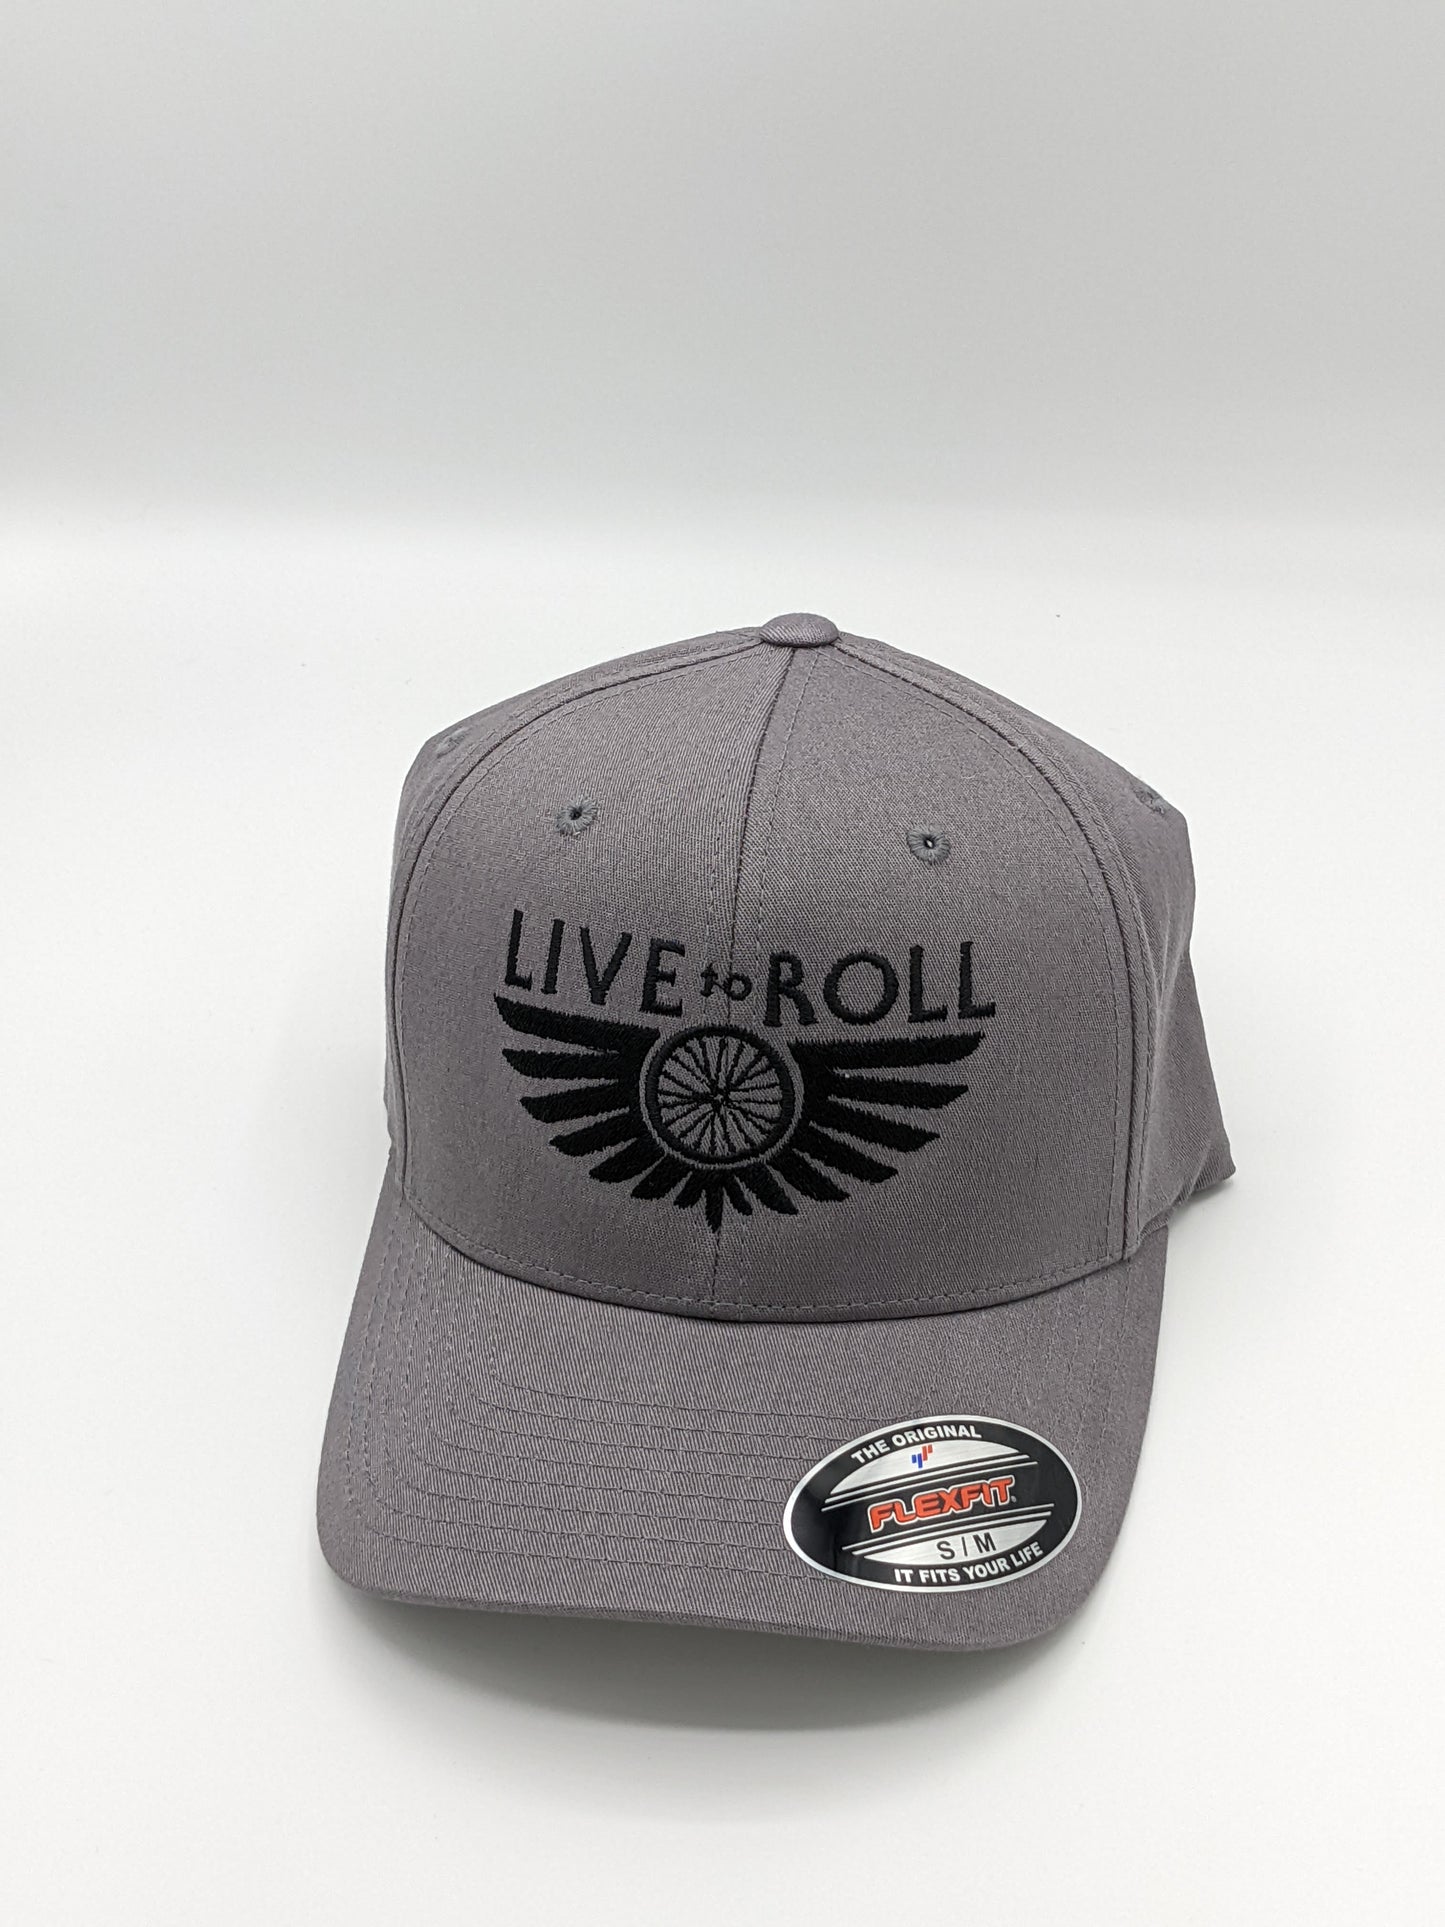 Live To Roll Hats